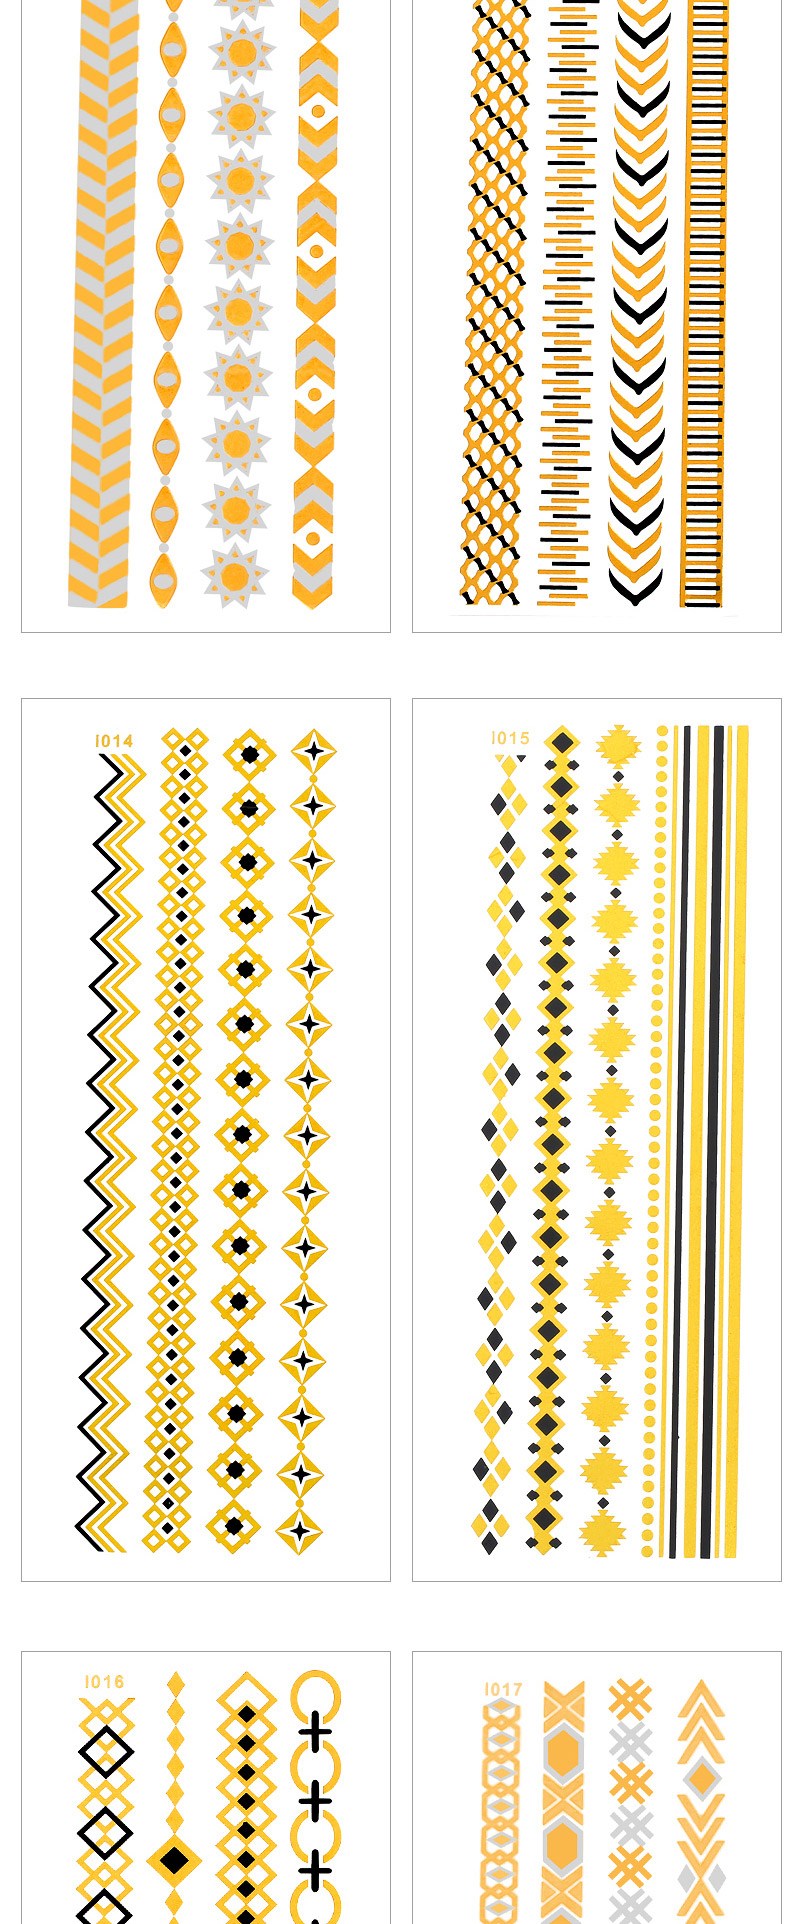 Personality Gold Color Chains Pattern Flash Sheet Temporary Design,Tattoos&body Art